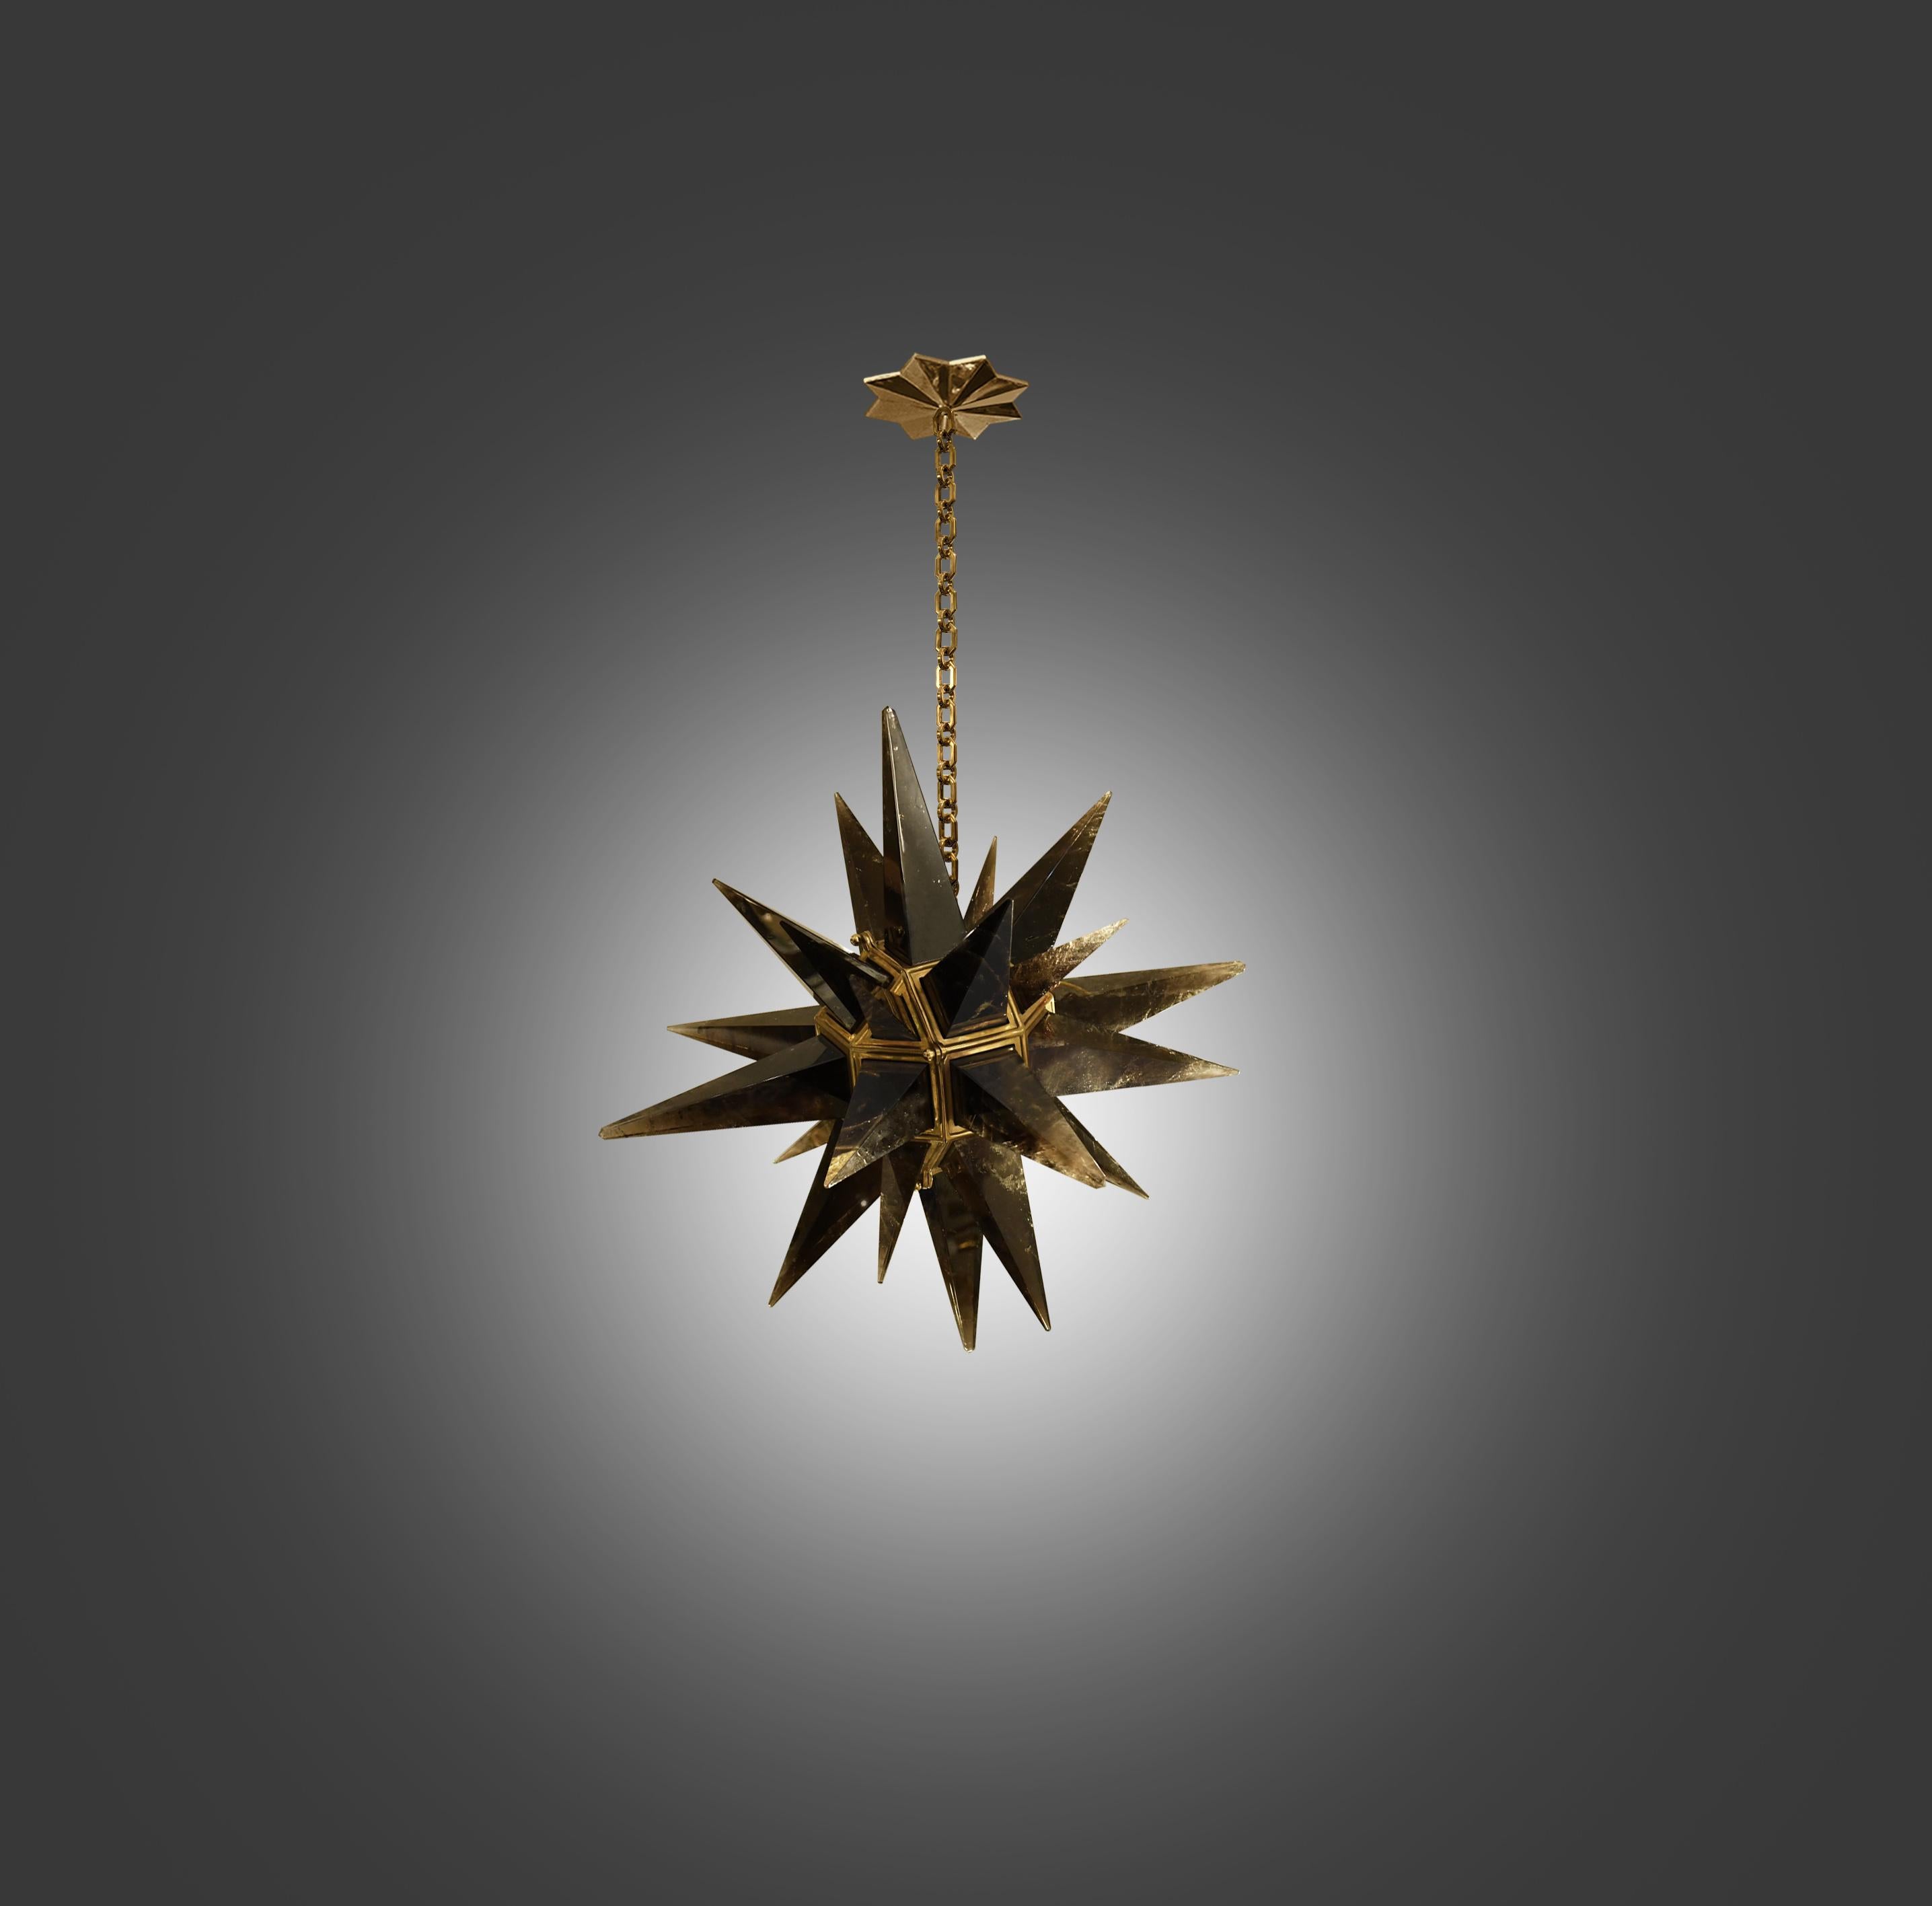 A modern dark brown rock crystal star chandelier with brass frame. Created by Phoenix Gallery, NYC.
The chandelier is 27